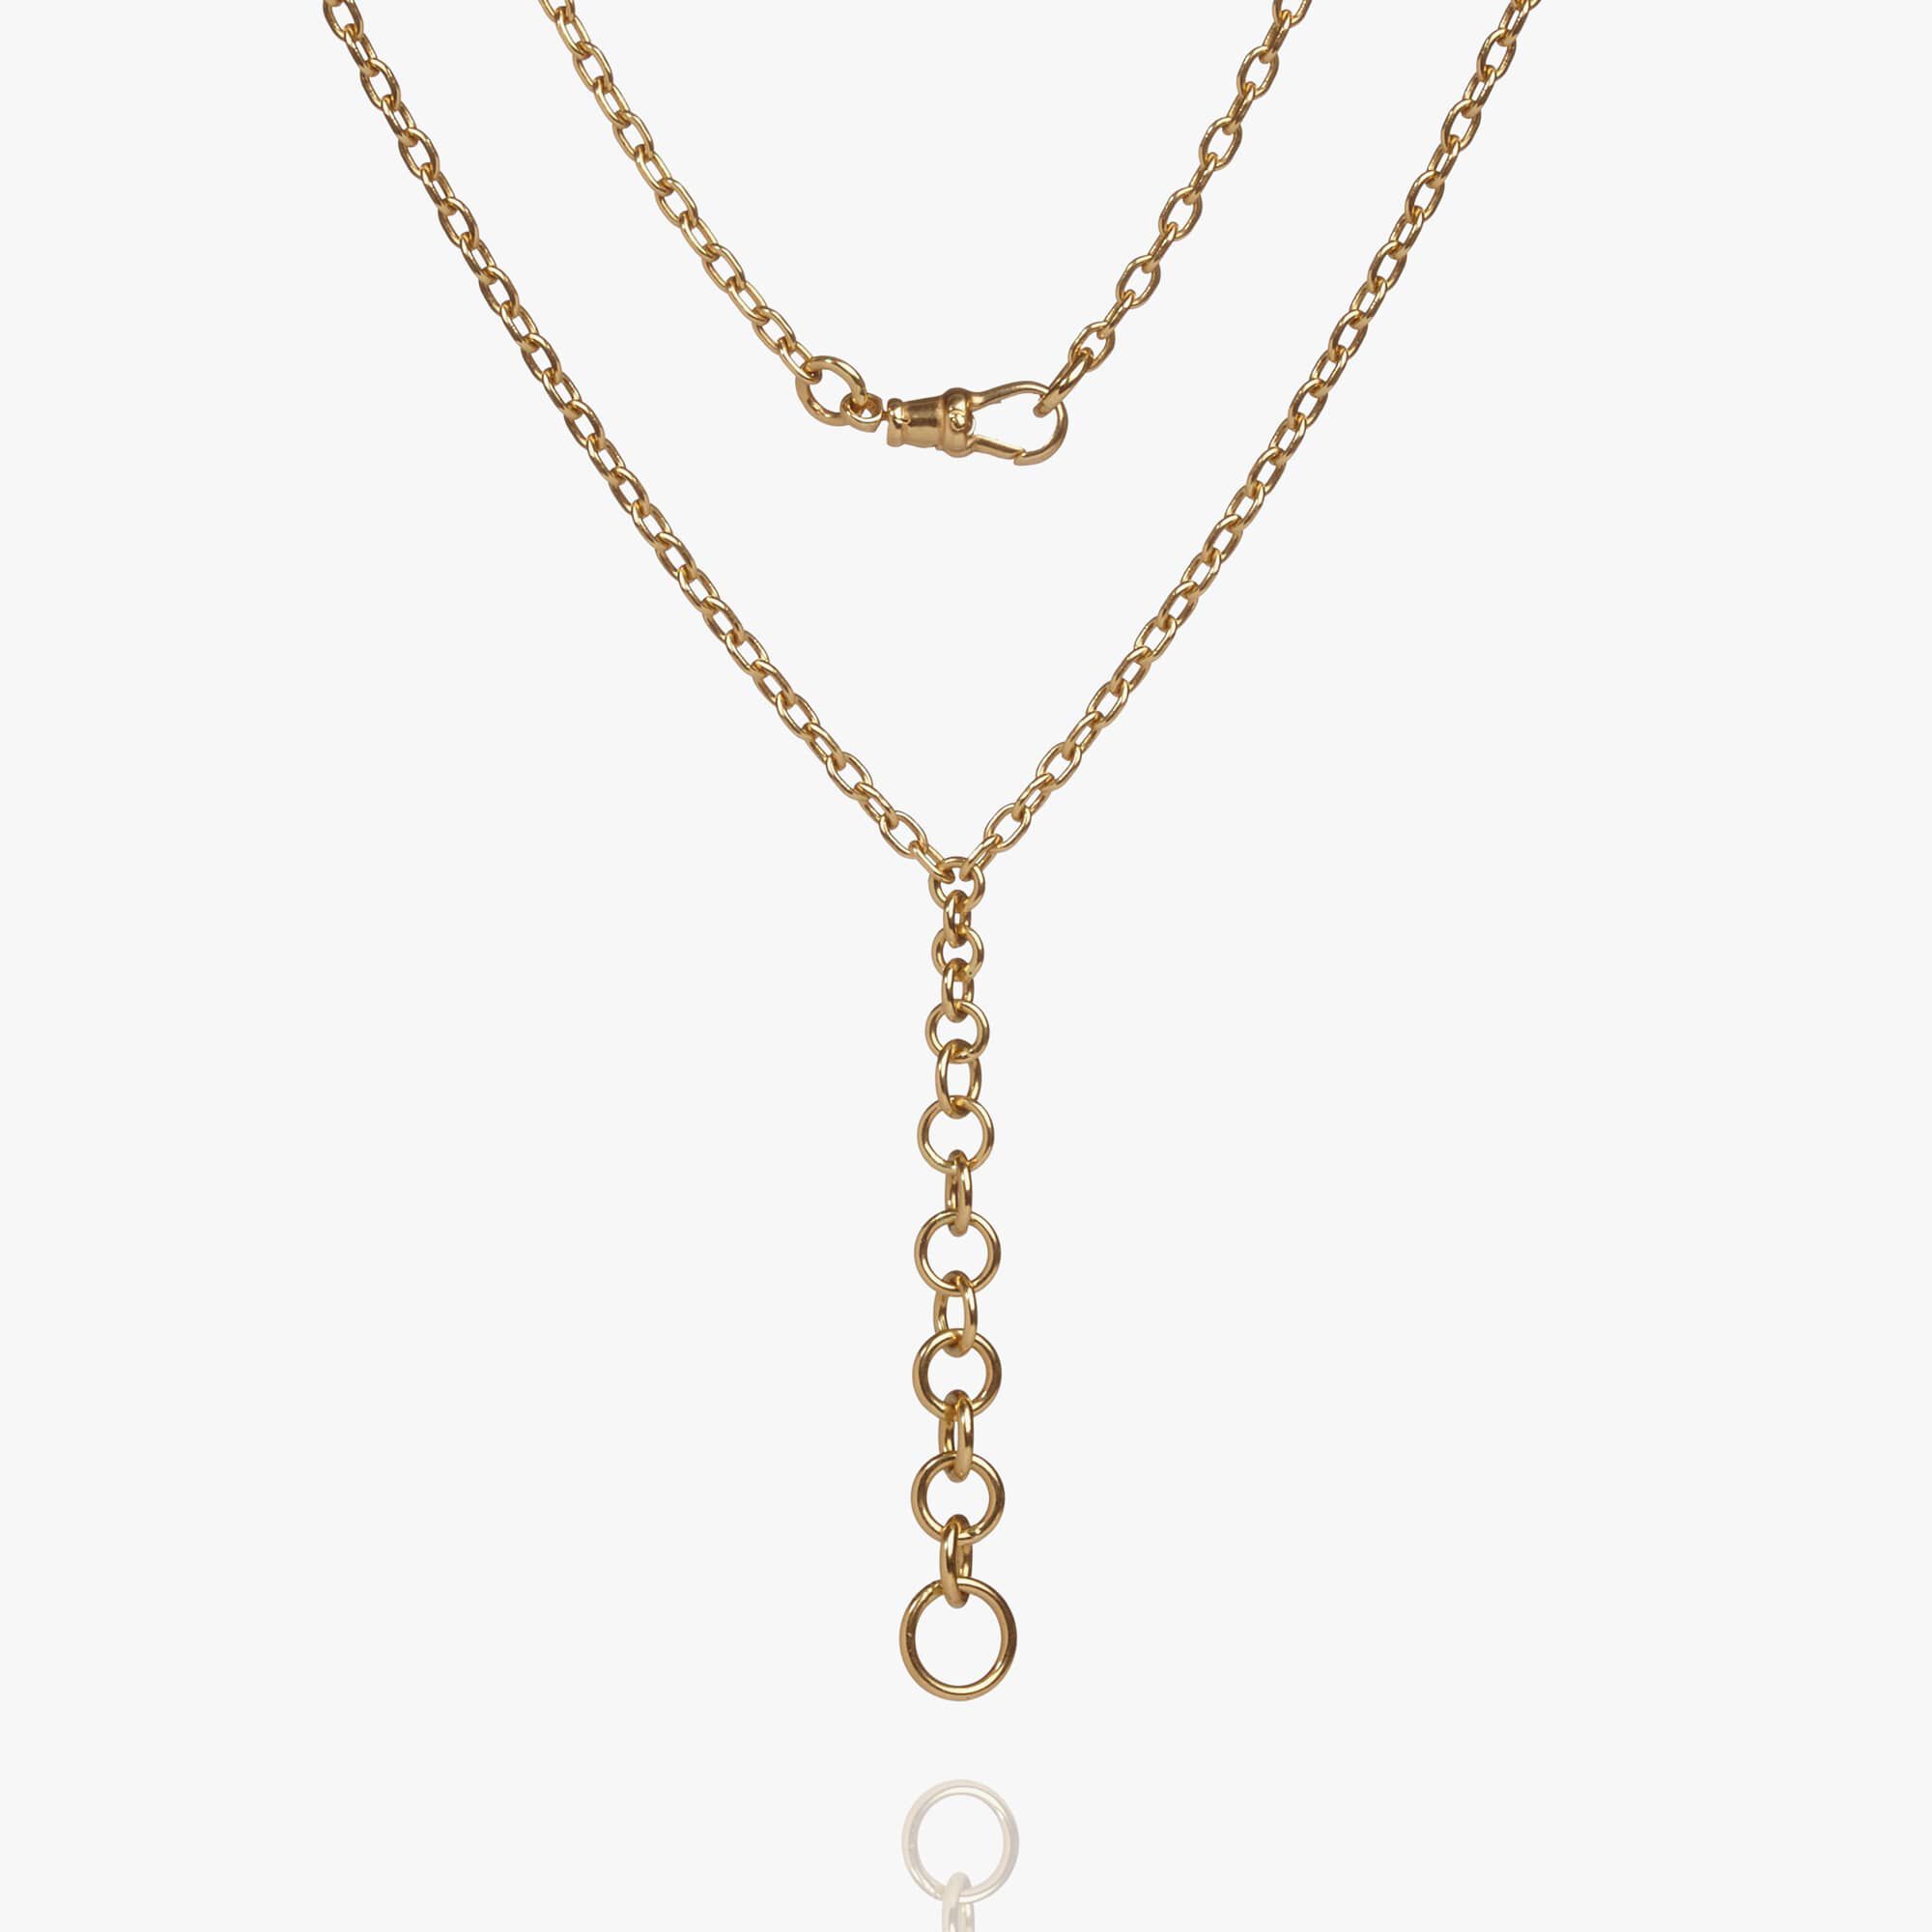 gold charm necklace